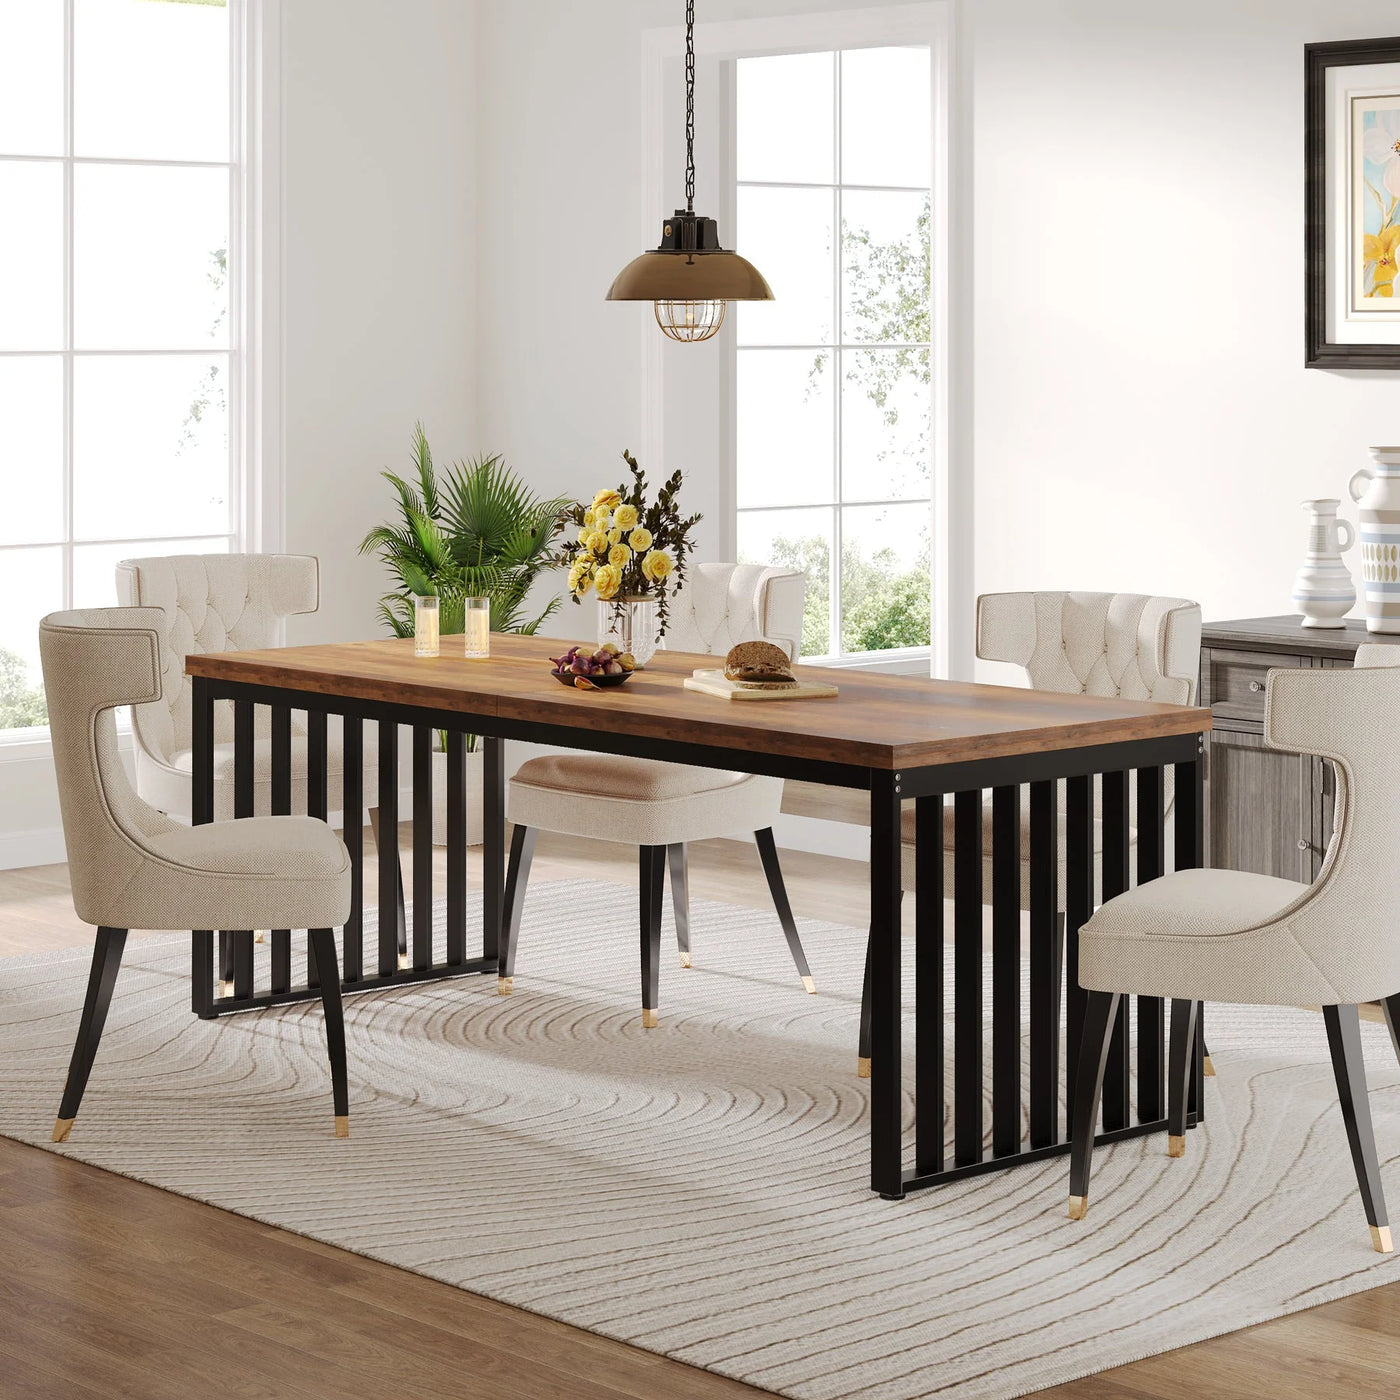 Olivare Modern Dining Table | 78.74 inches Wooden Sturdy Kitchen Table